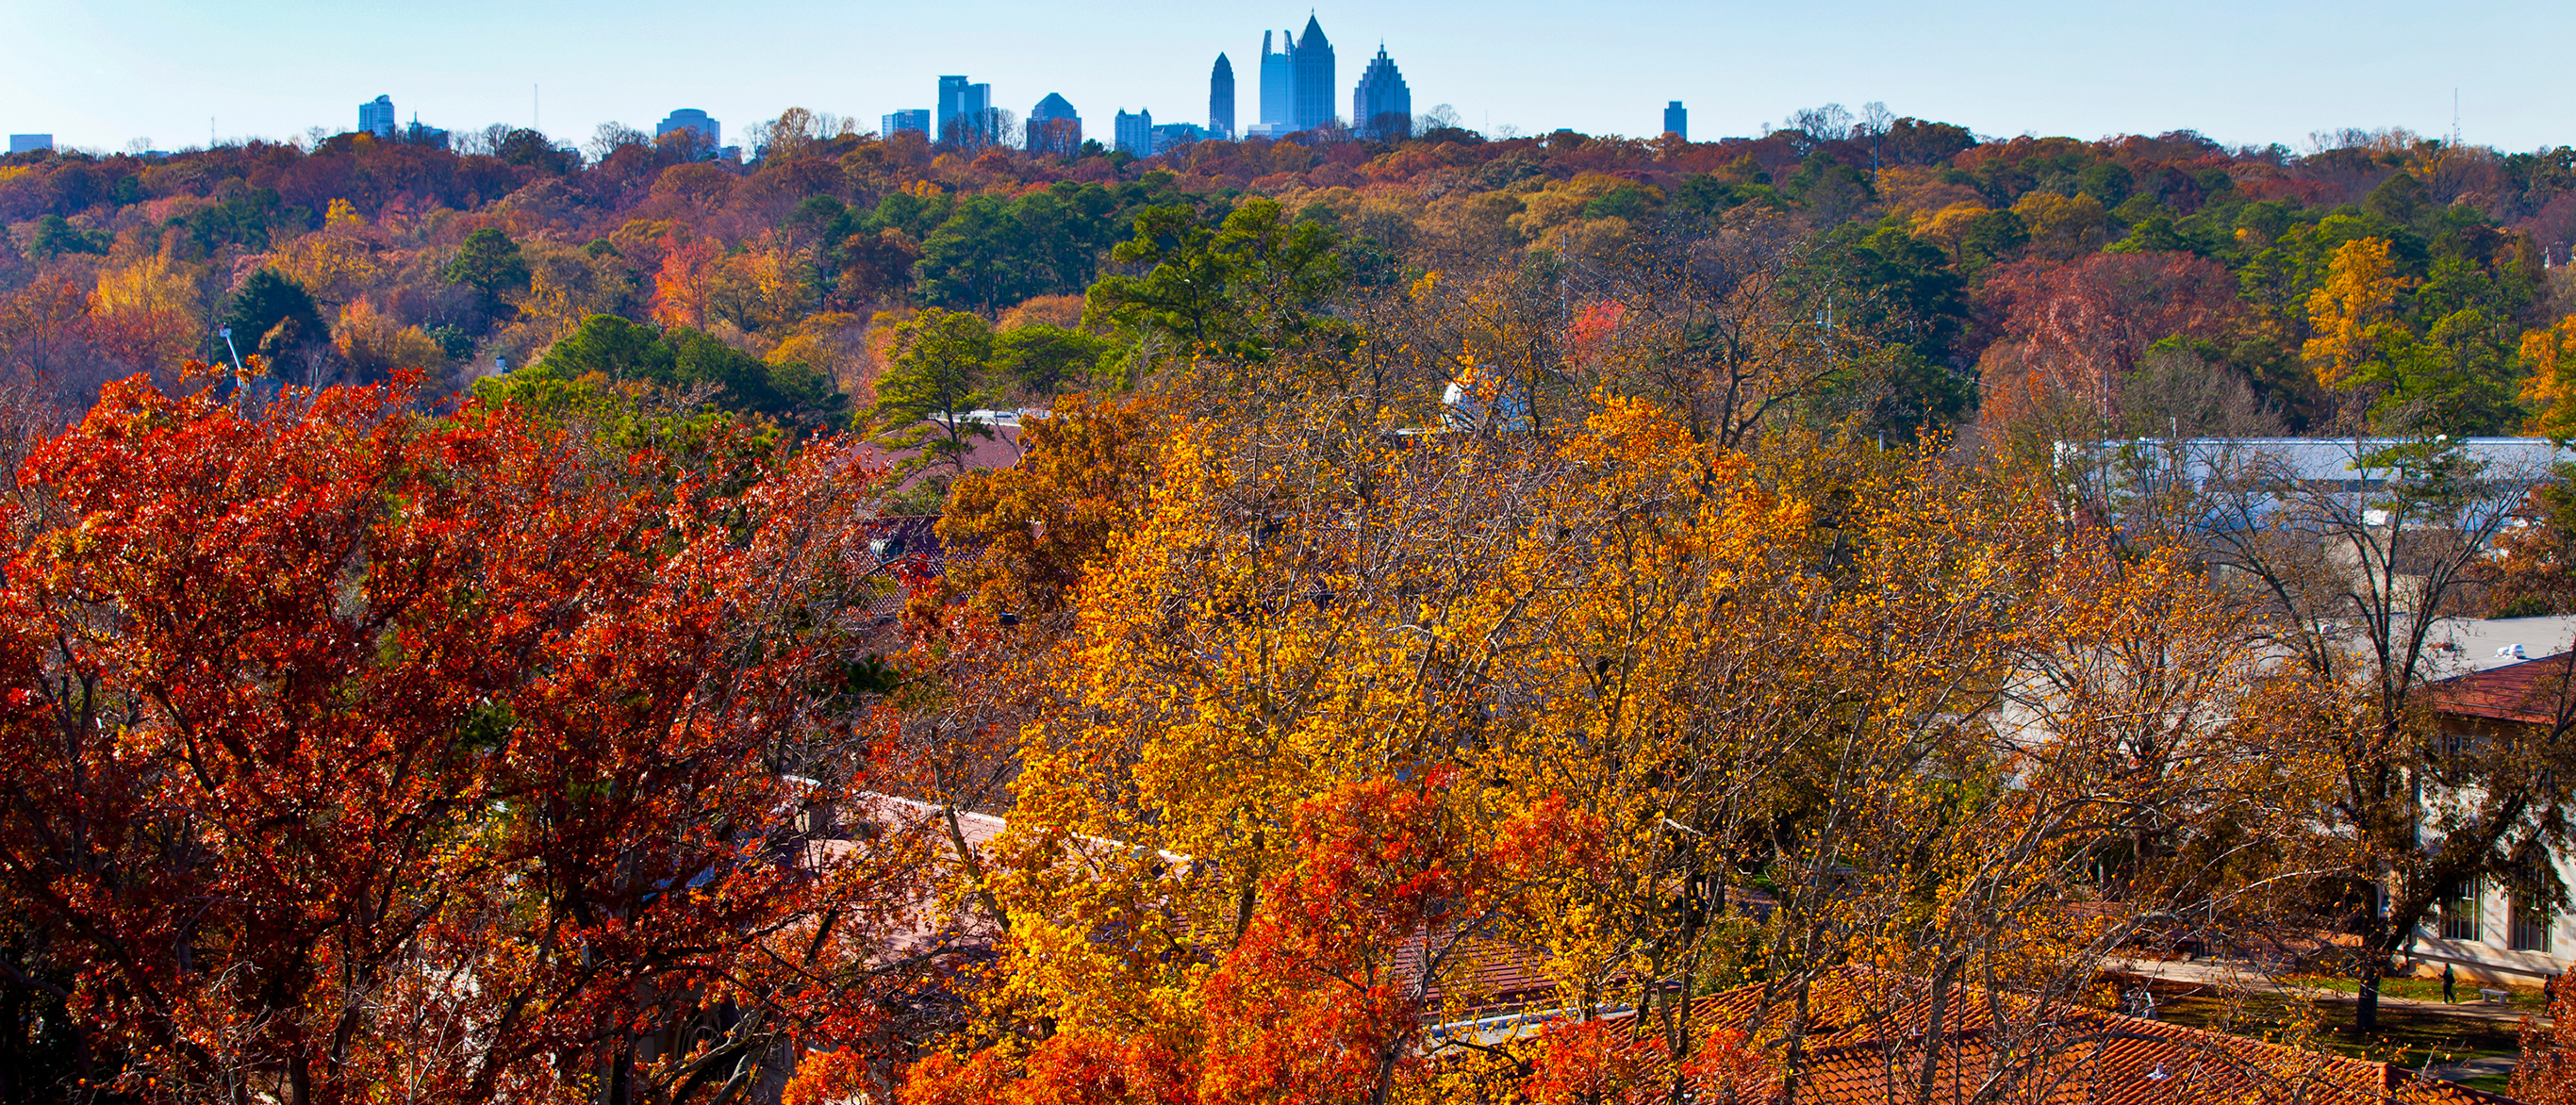 Fall on Emory campus with Atlanta in background